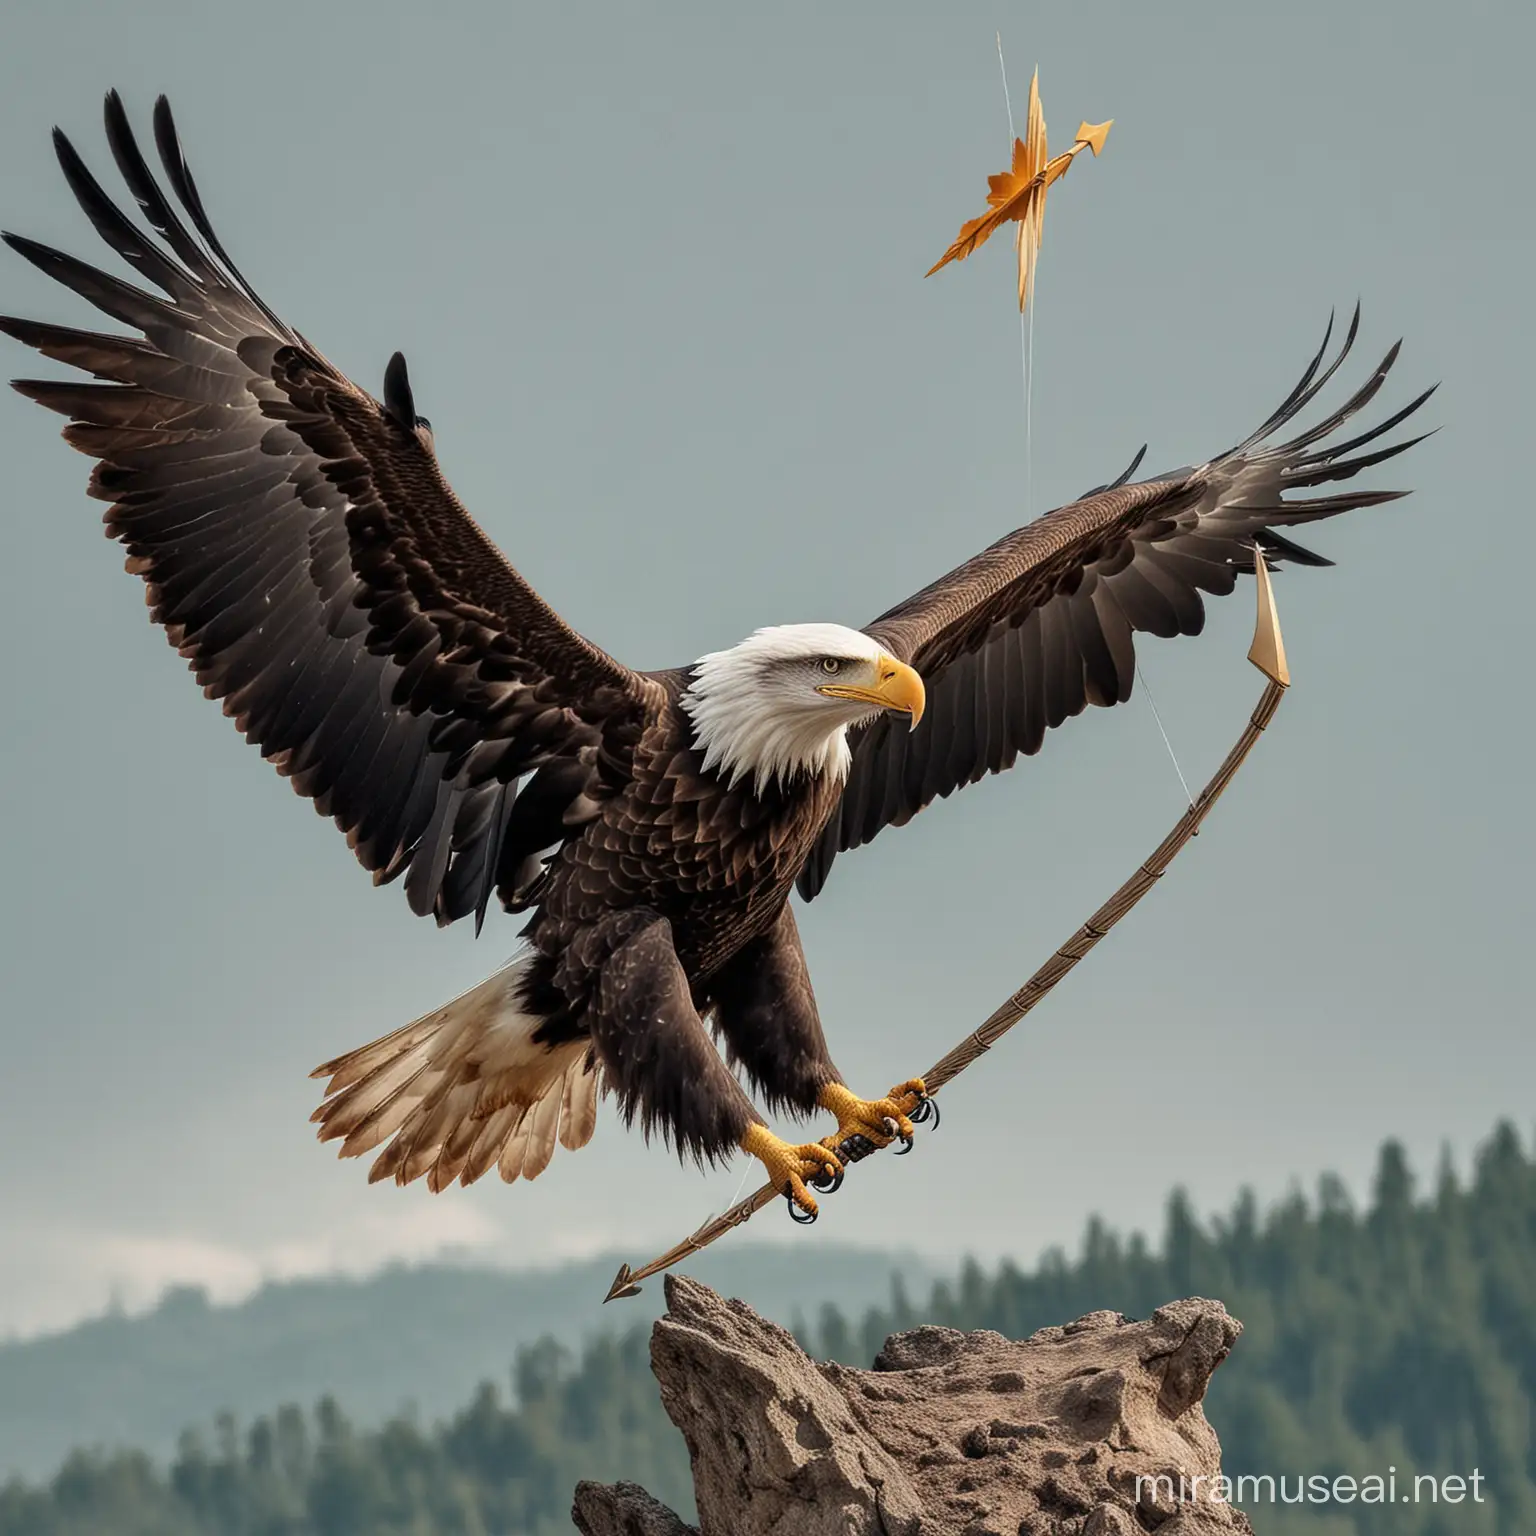 Majestic Eagle Ascending with Arrow in Flight